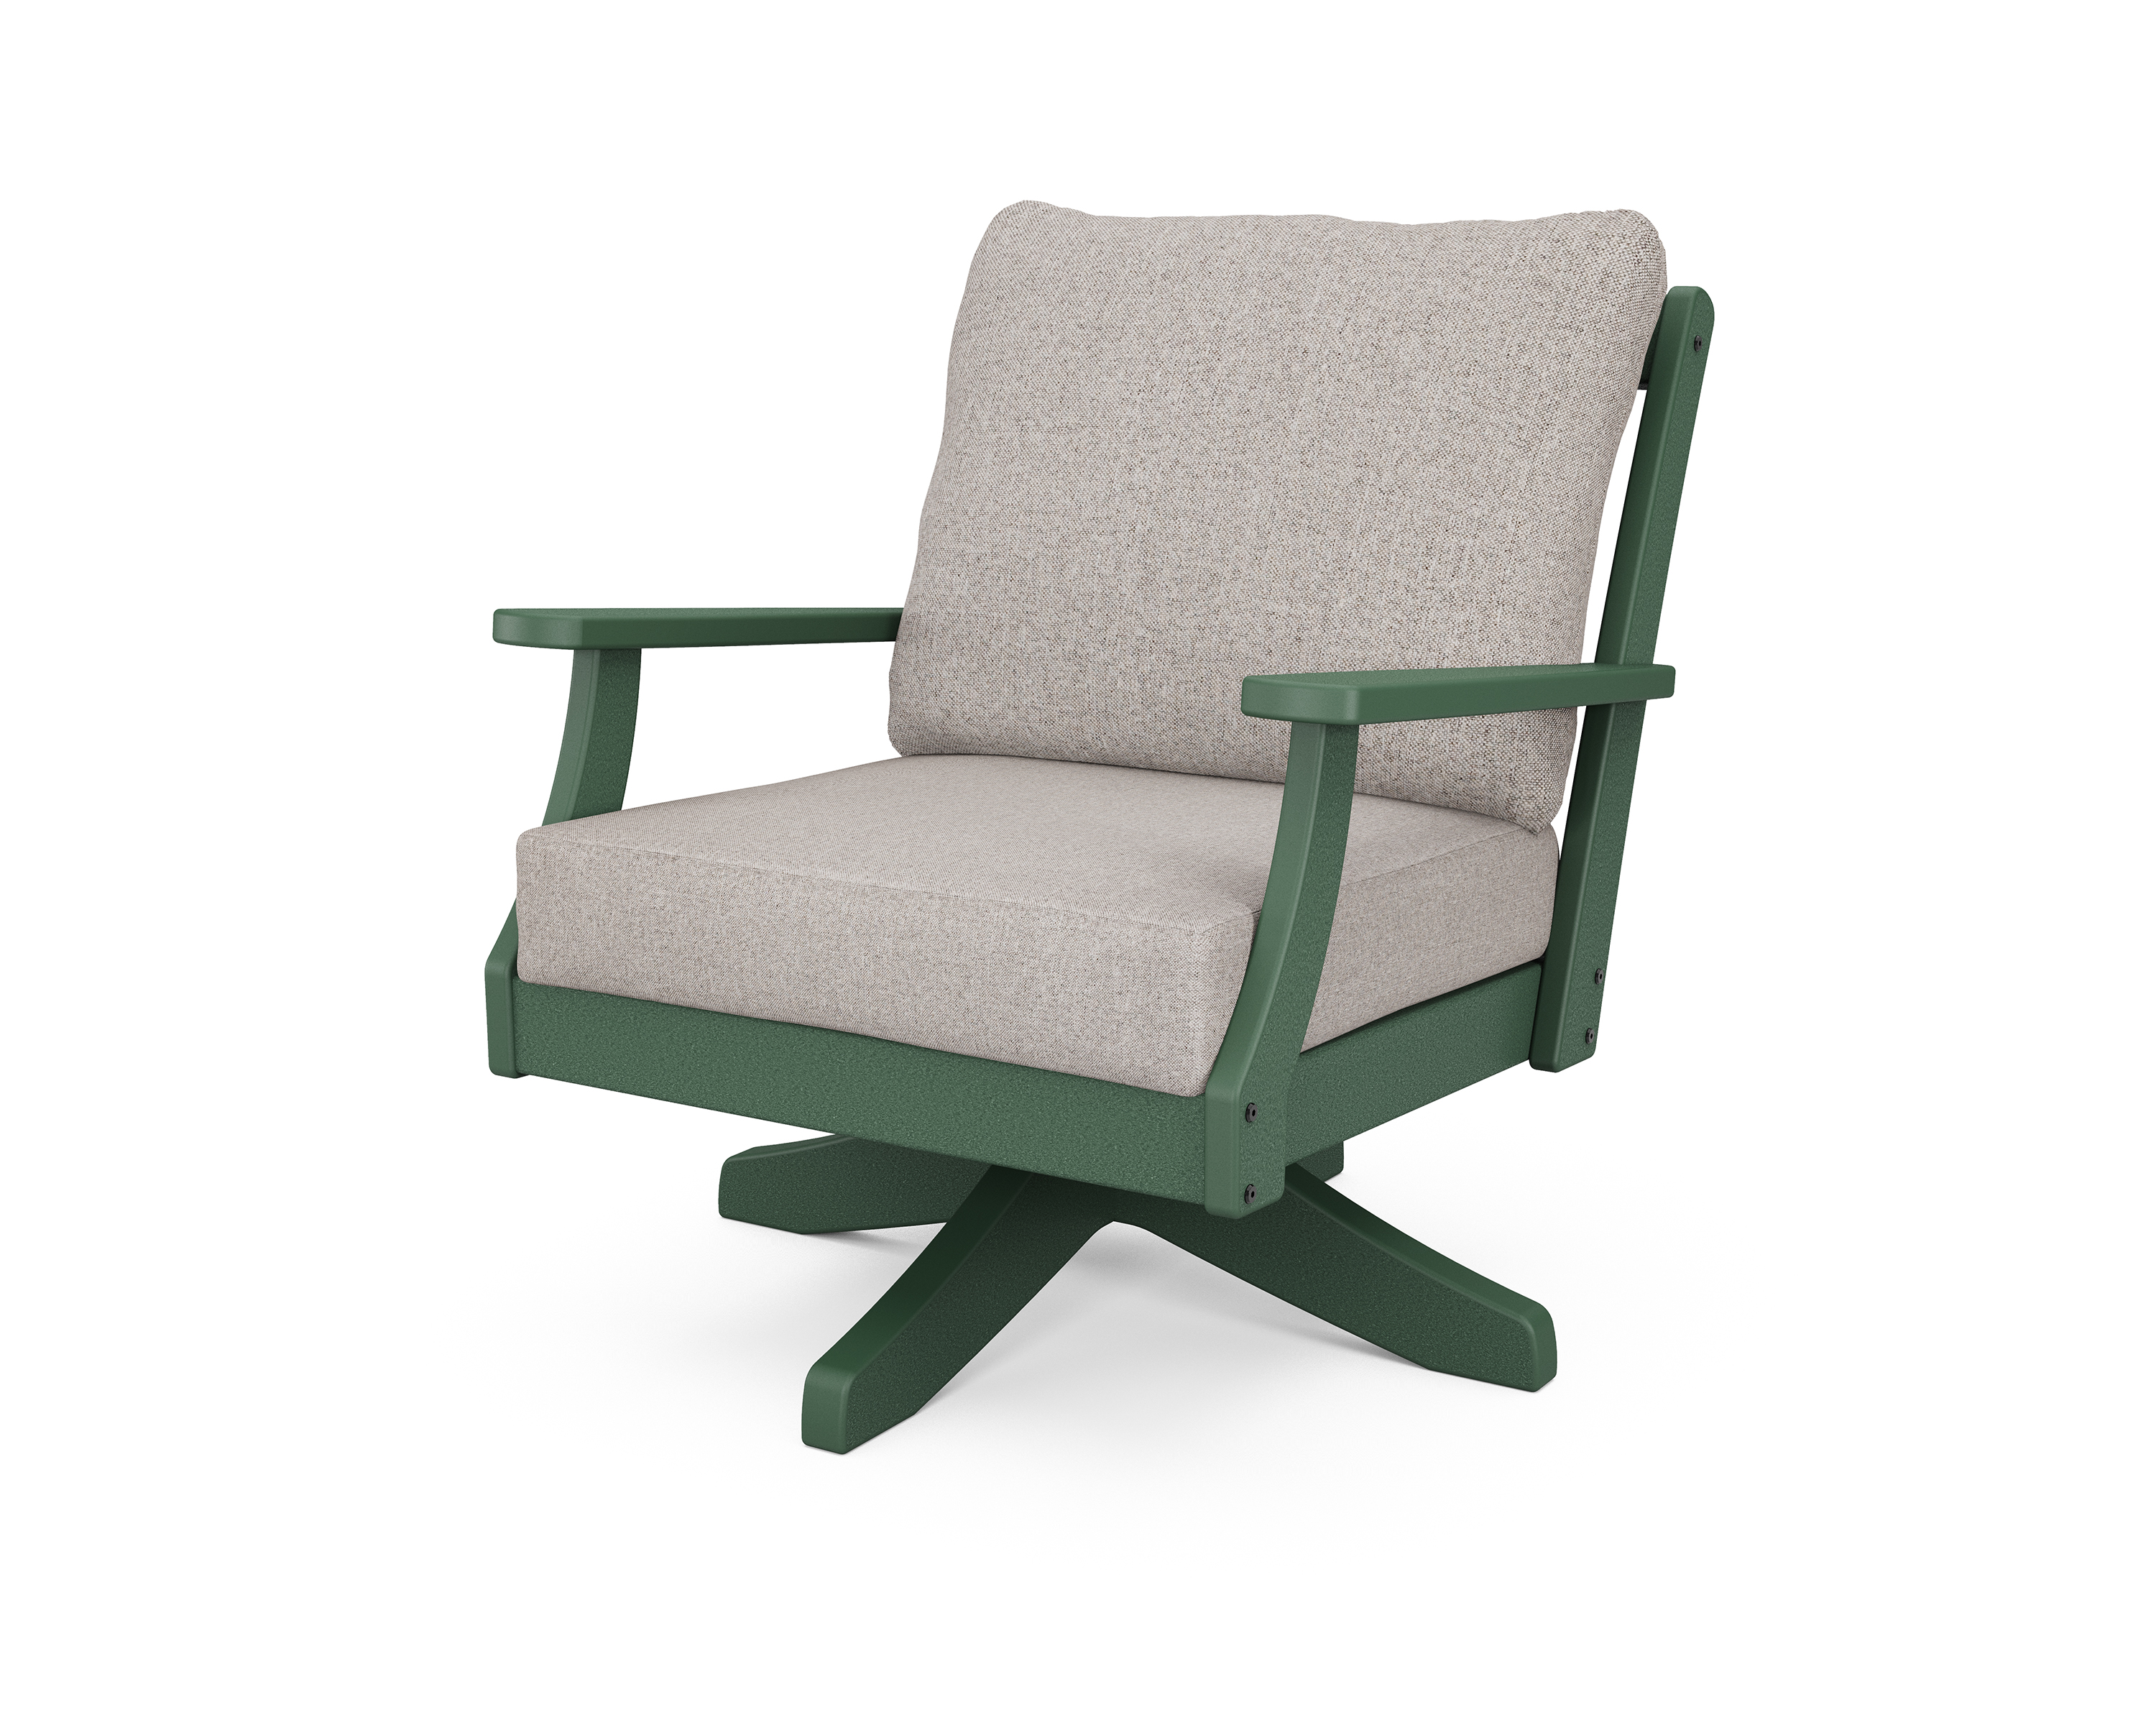 braxton deep seating swivel chair in green / weathered tweed product image